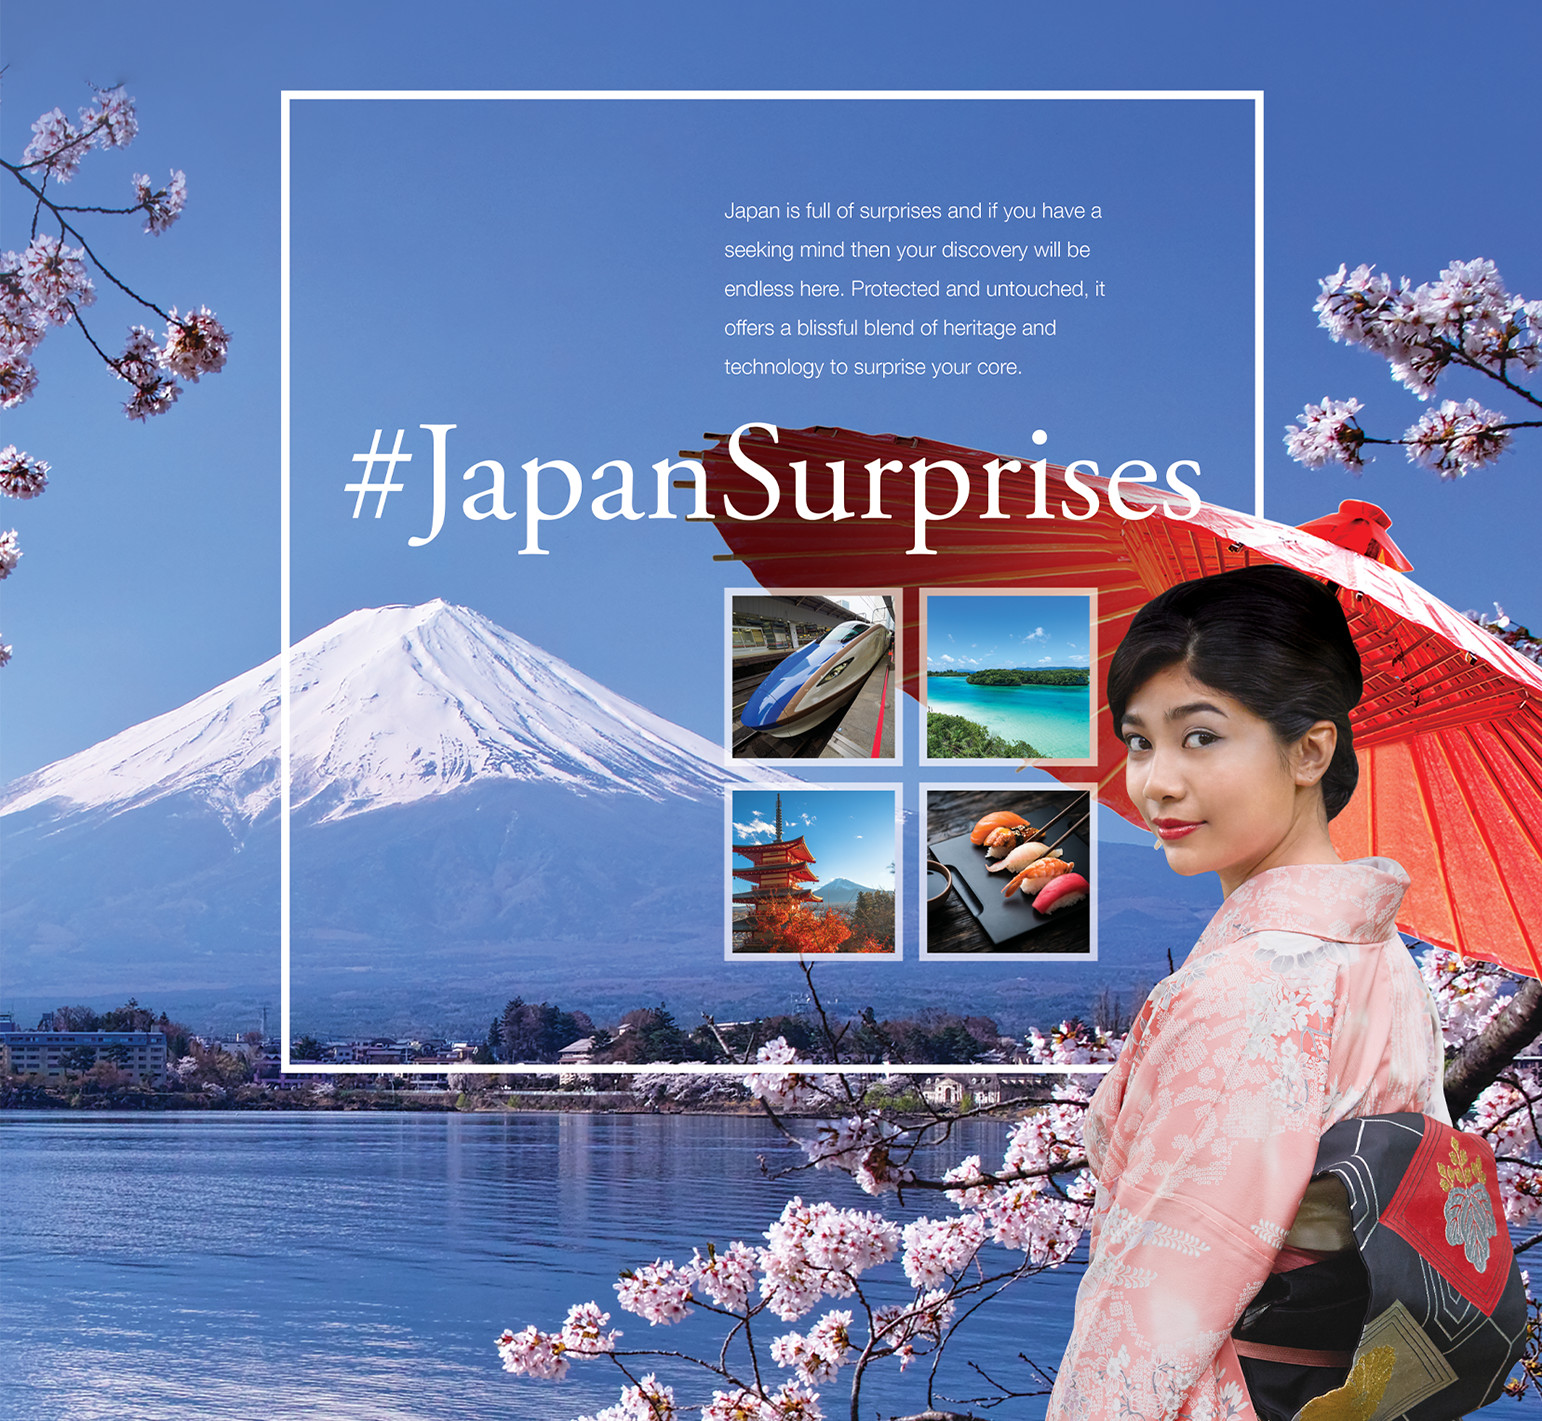 #JapanSurprises Japan is full of surprises and if you have a seeking mind then your discovery will be endless here. Protected and untouched, it offers a blissful blend of heritage and technology to surprise your core.